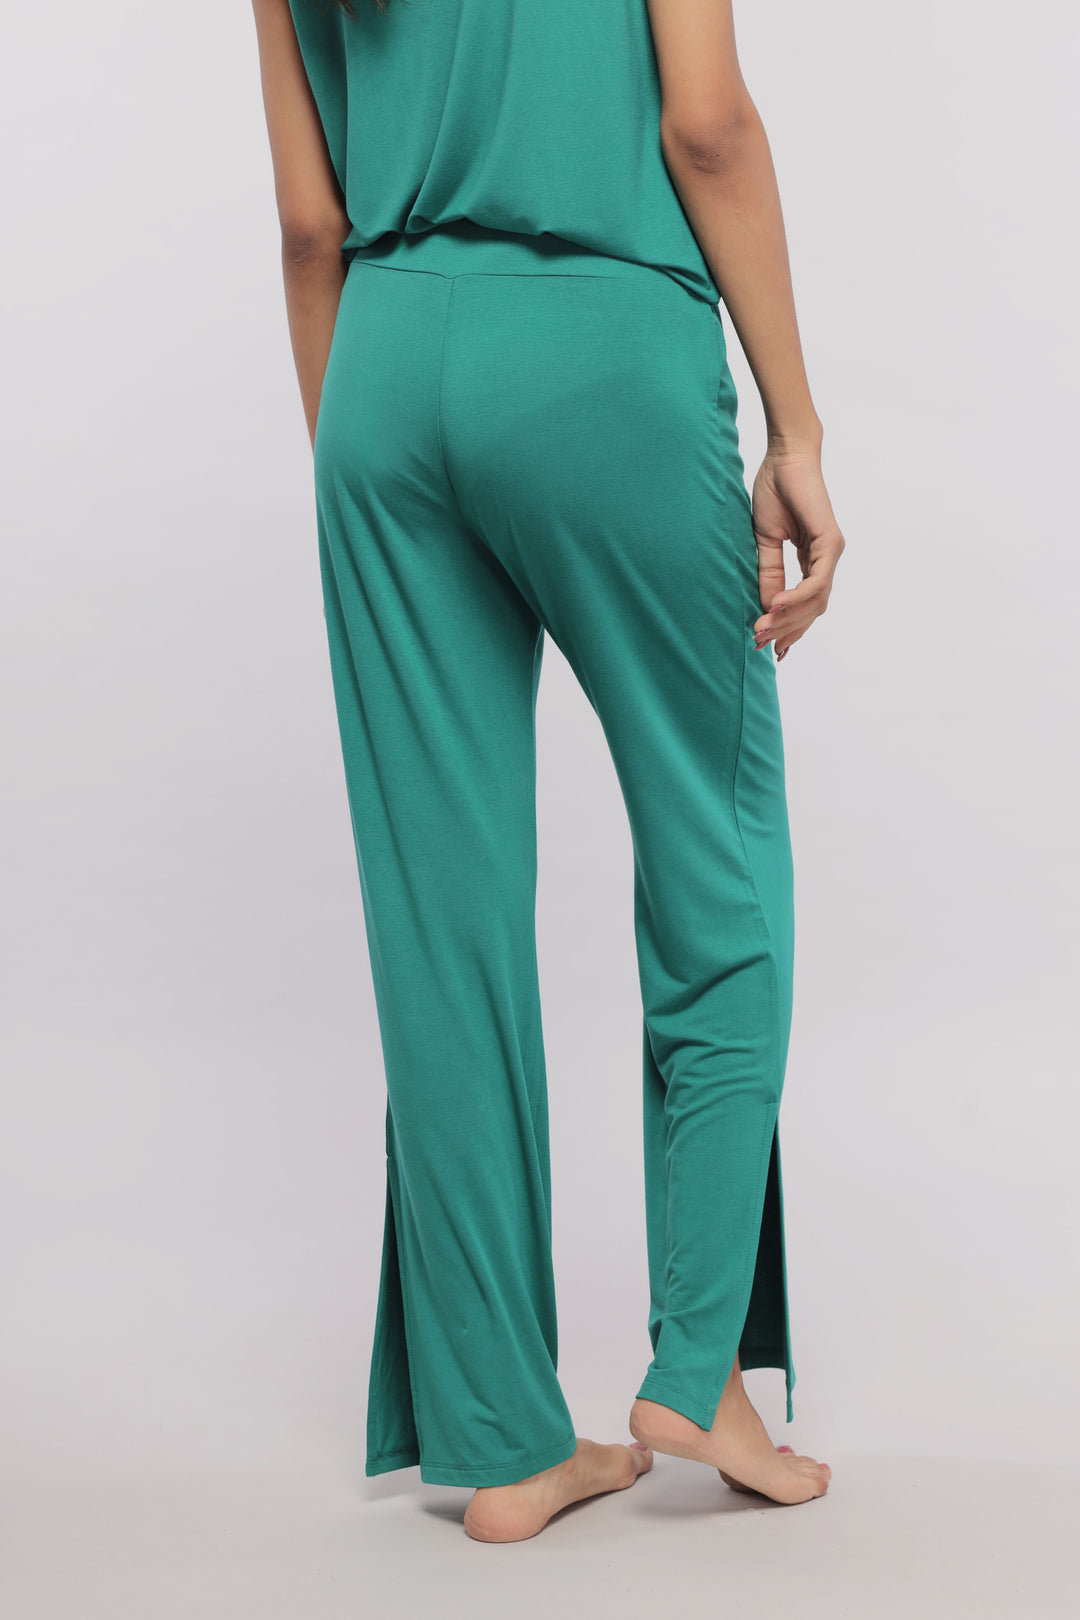 Green Flared Lounge Pants with Side Slits